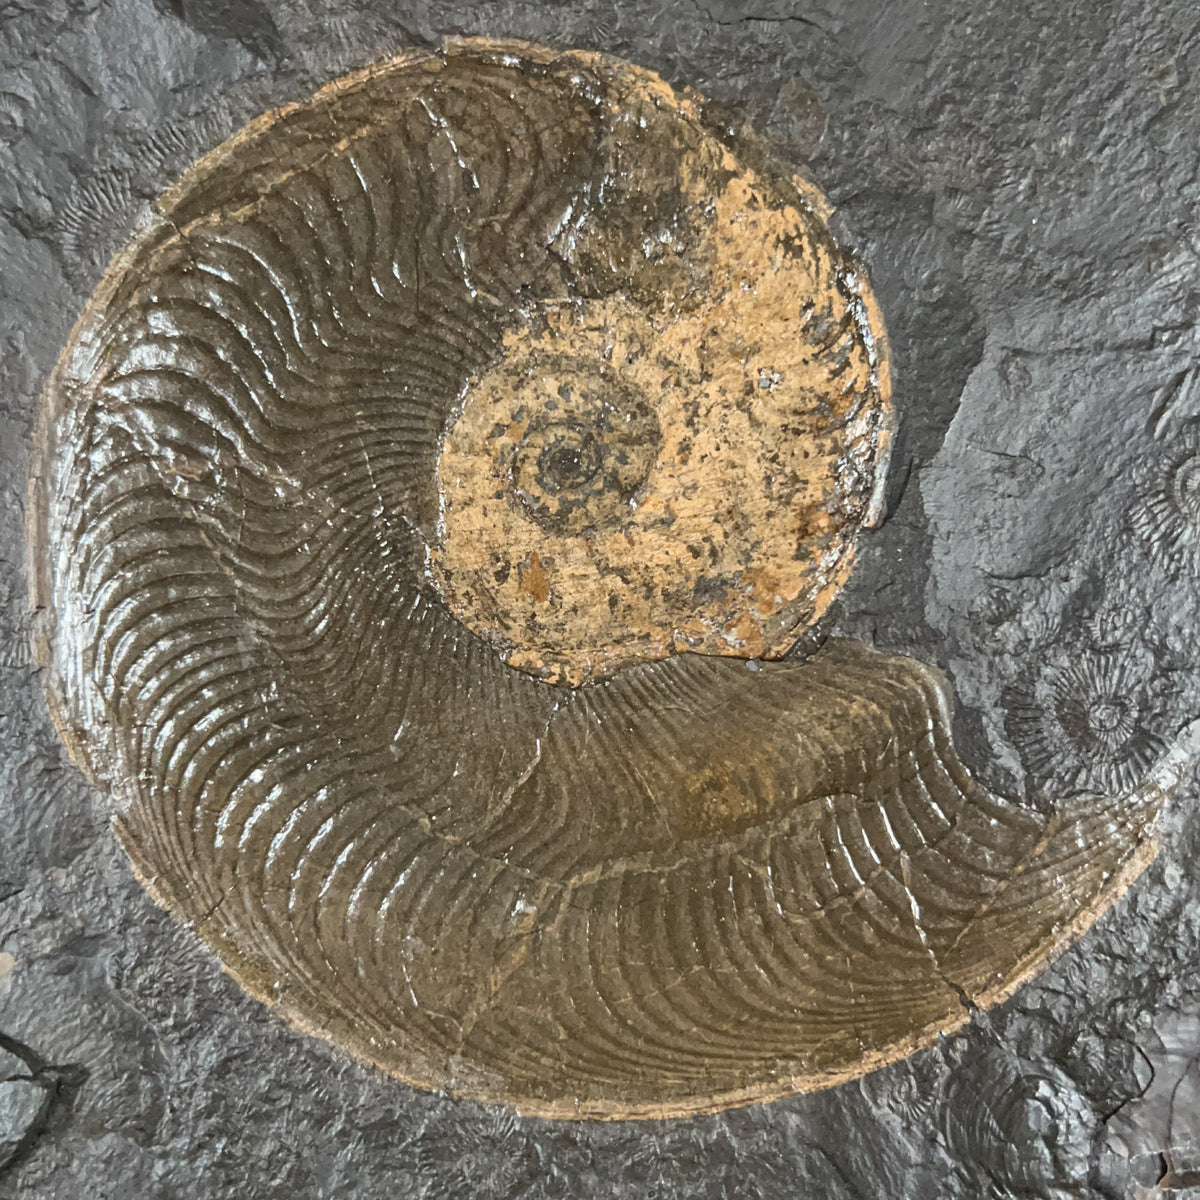 Detailed View of Pyritized Harpoceras Ammonite Fossil